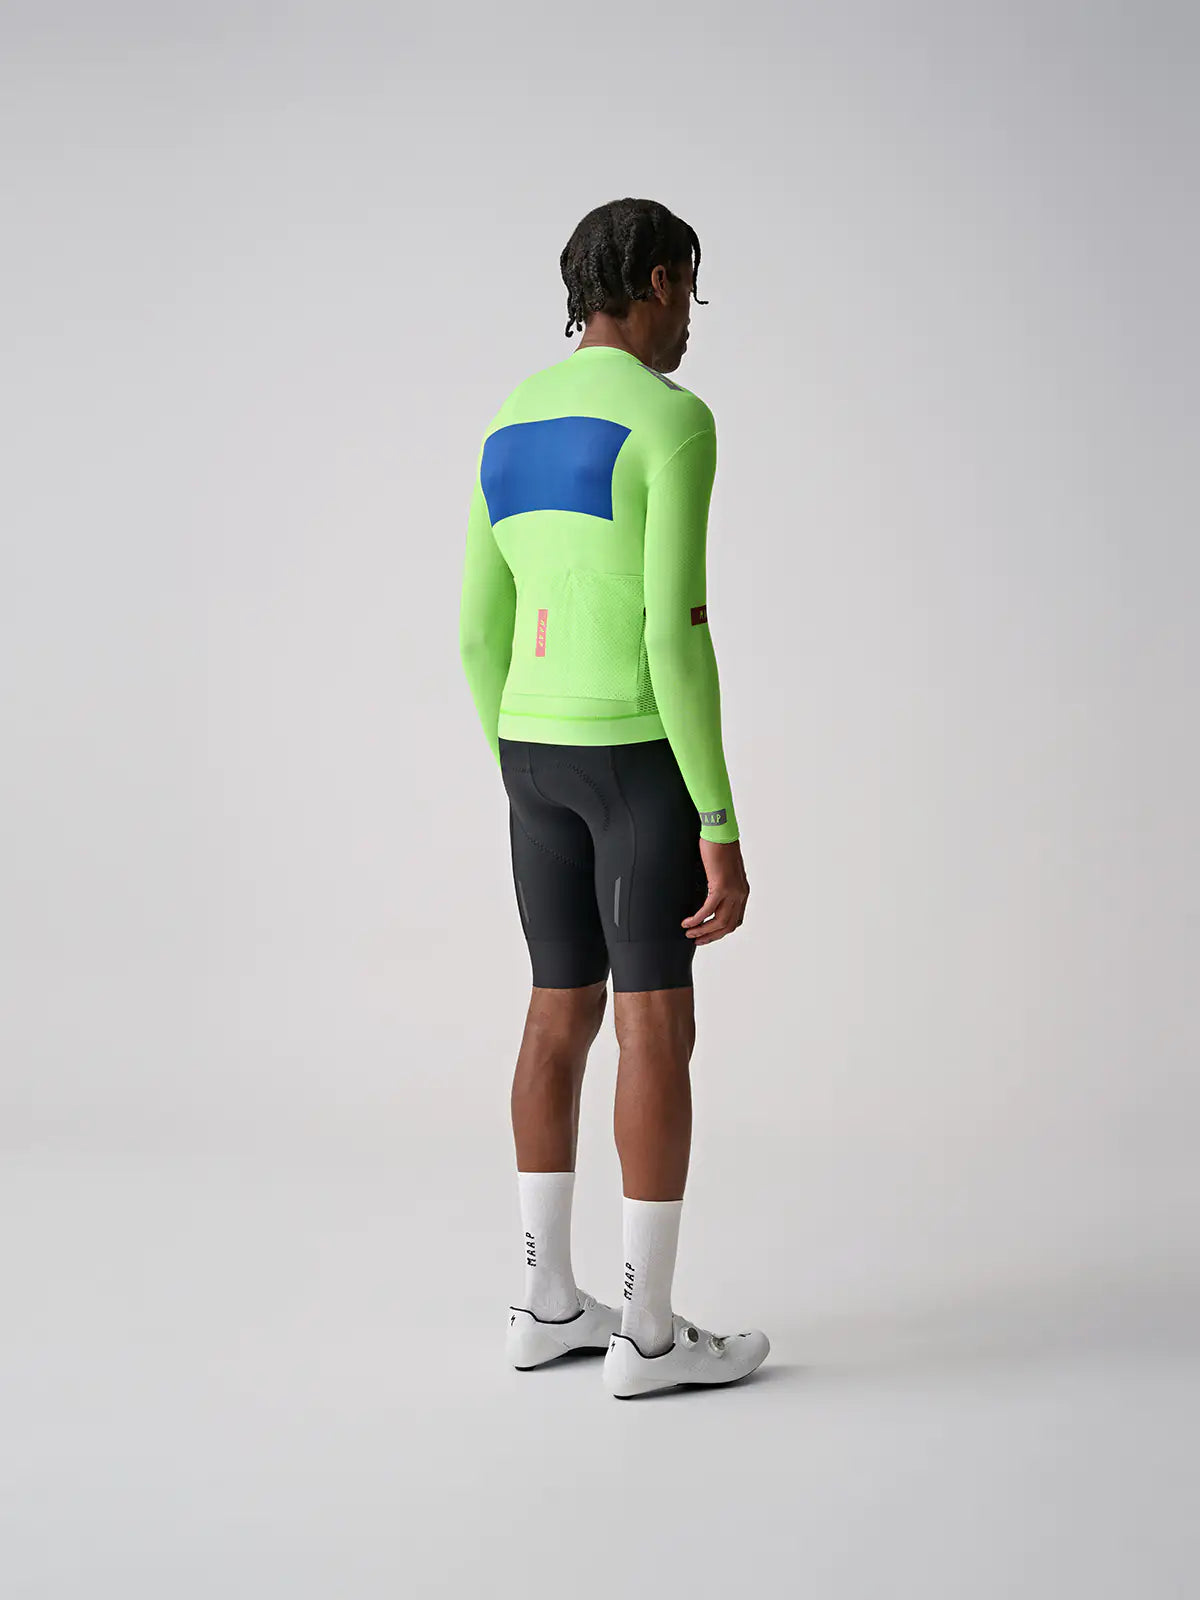 MAAP System Pro Air LS Jersey  Glow メンズ 長袖サイクルジャージ | CYCLISM